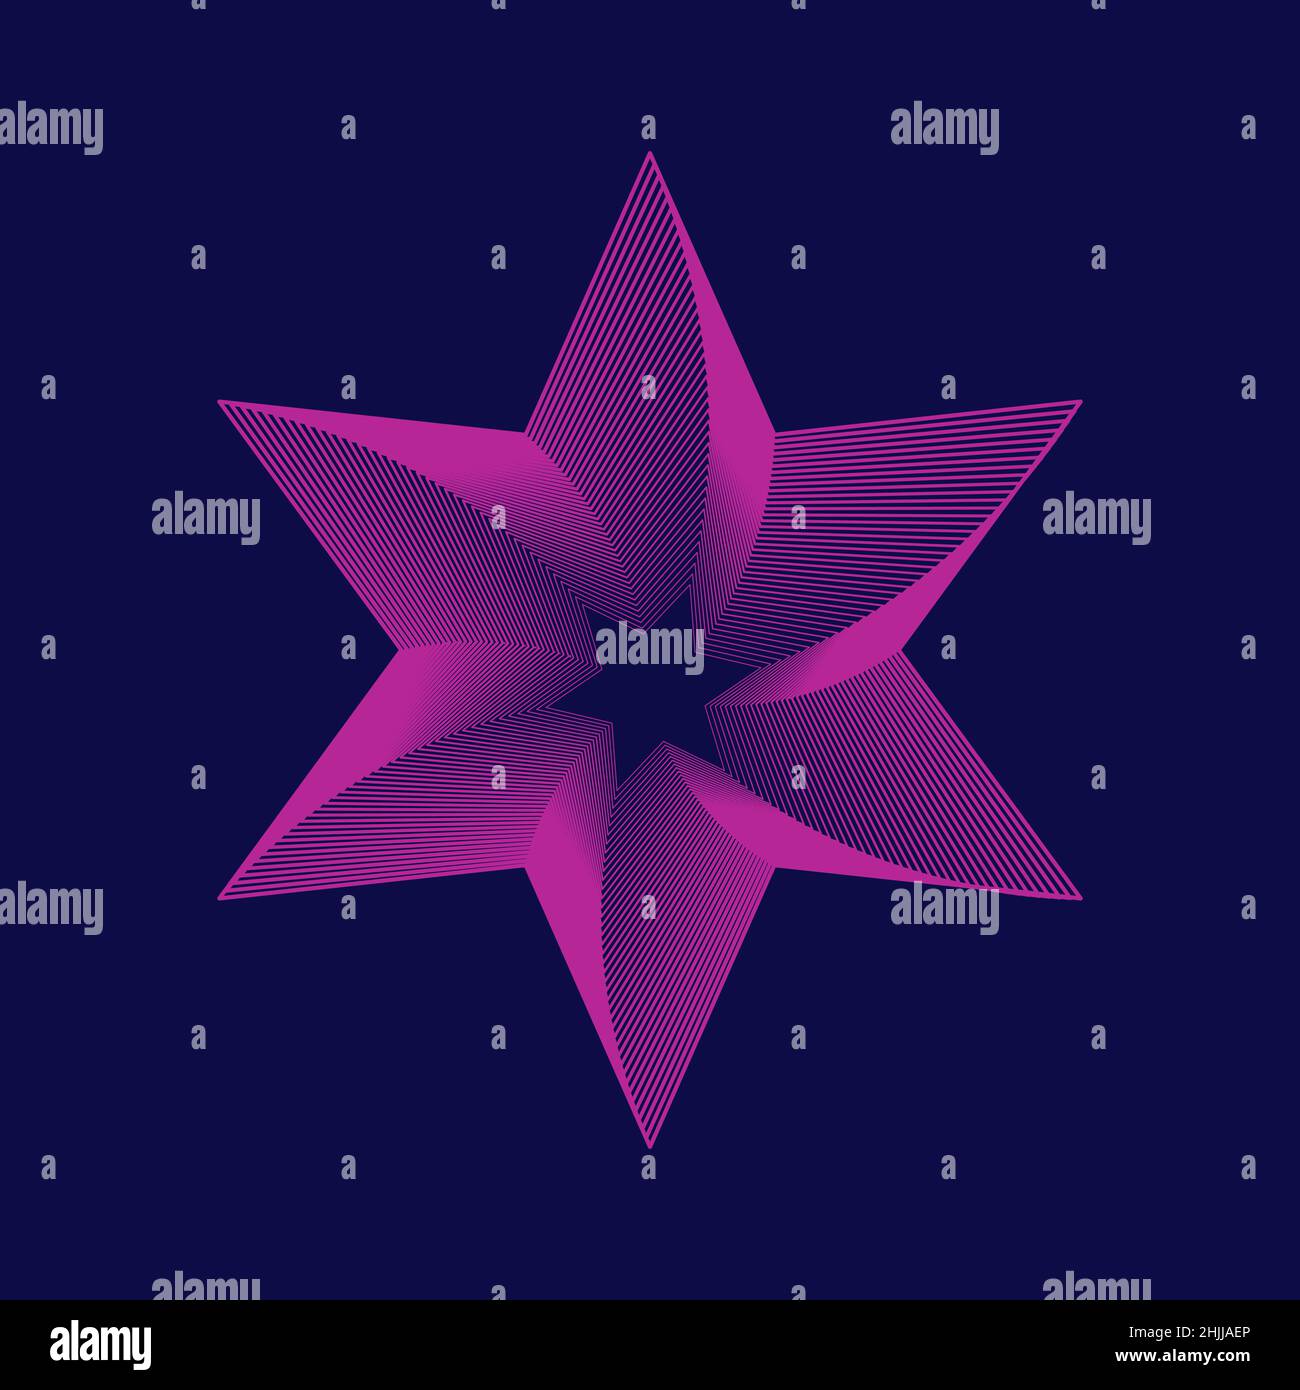 Abstract star shape on dark blue background. Purple wireframe star made of lines. Six pointed geometric star figure. Pink logo template. Vector Stock Vector